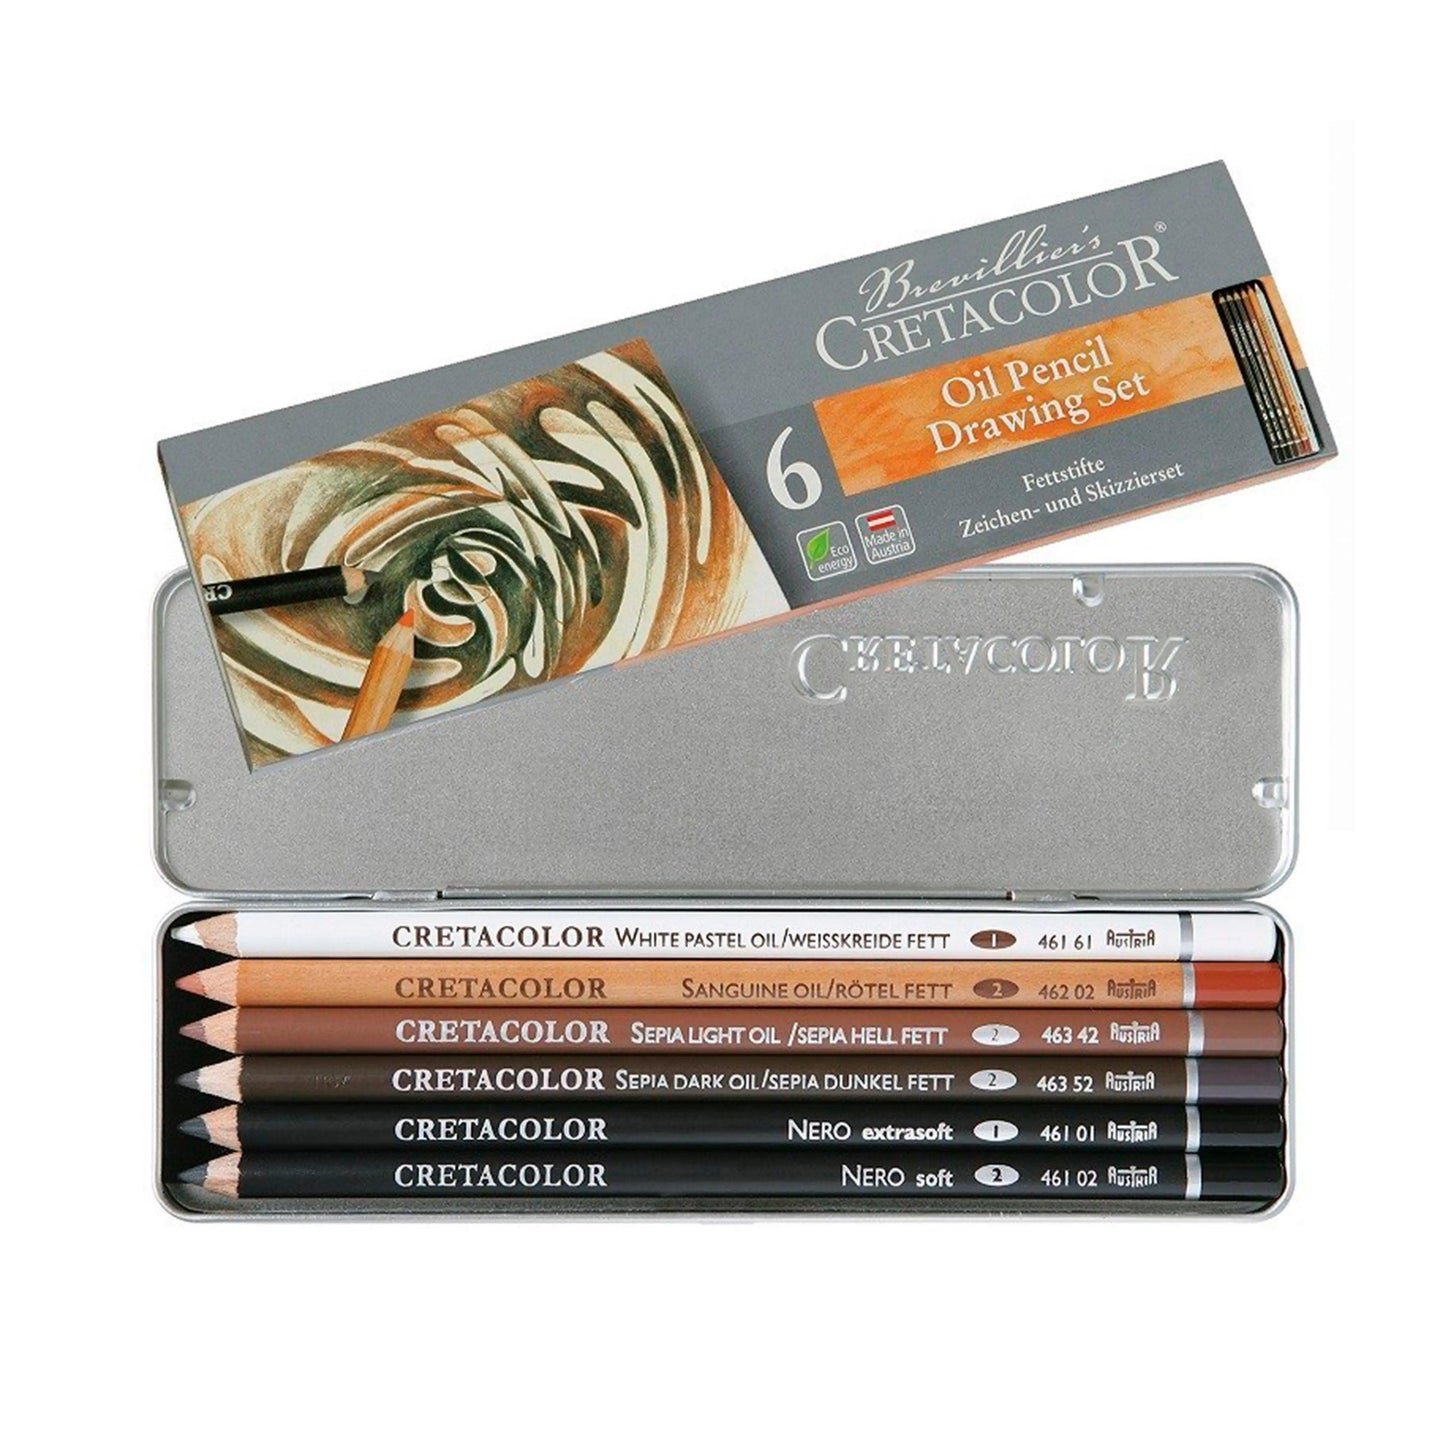 Cretacolor Artists OIL Pencil Drawing Set The Stationers